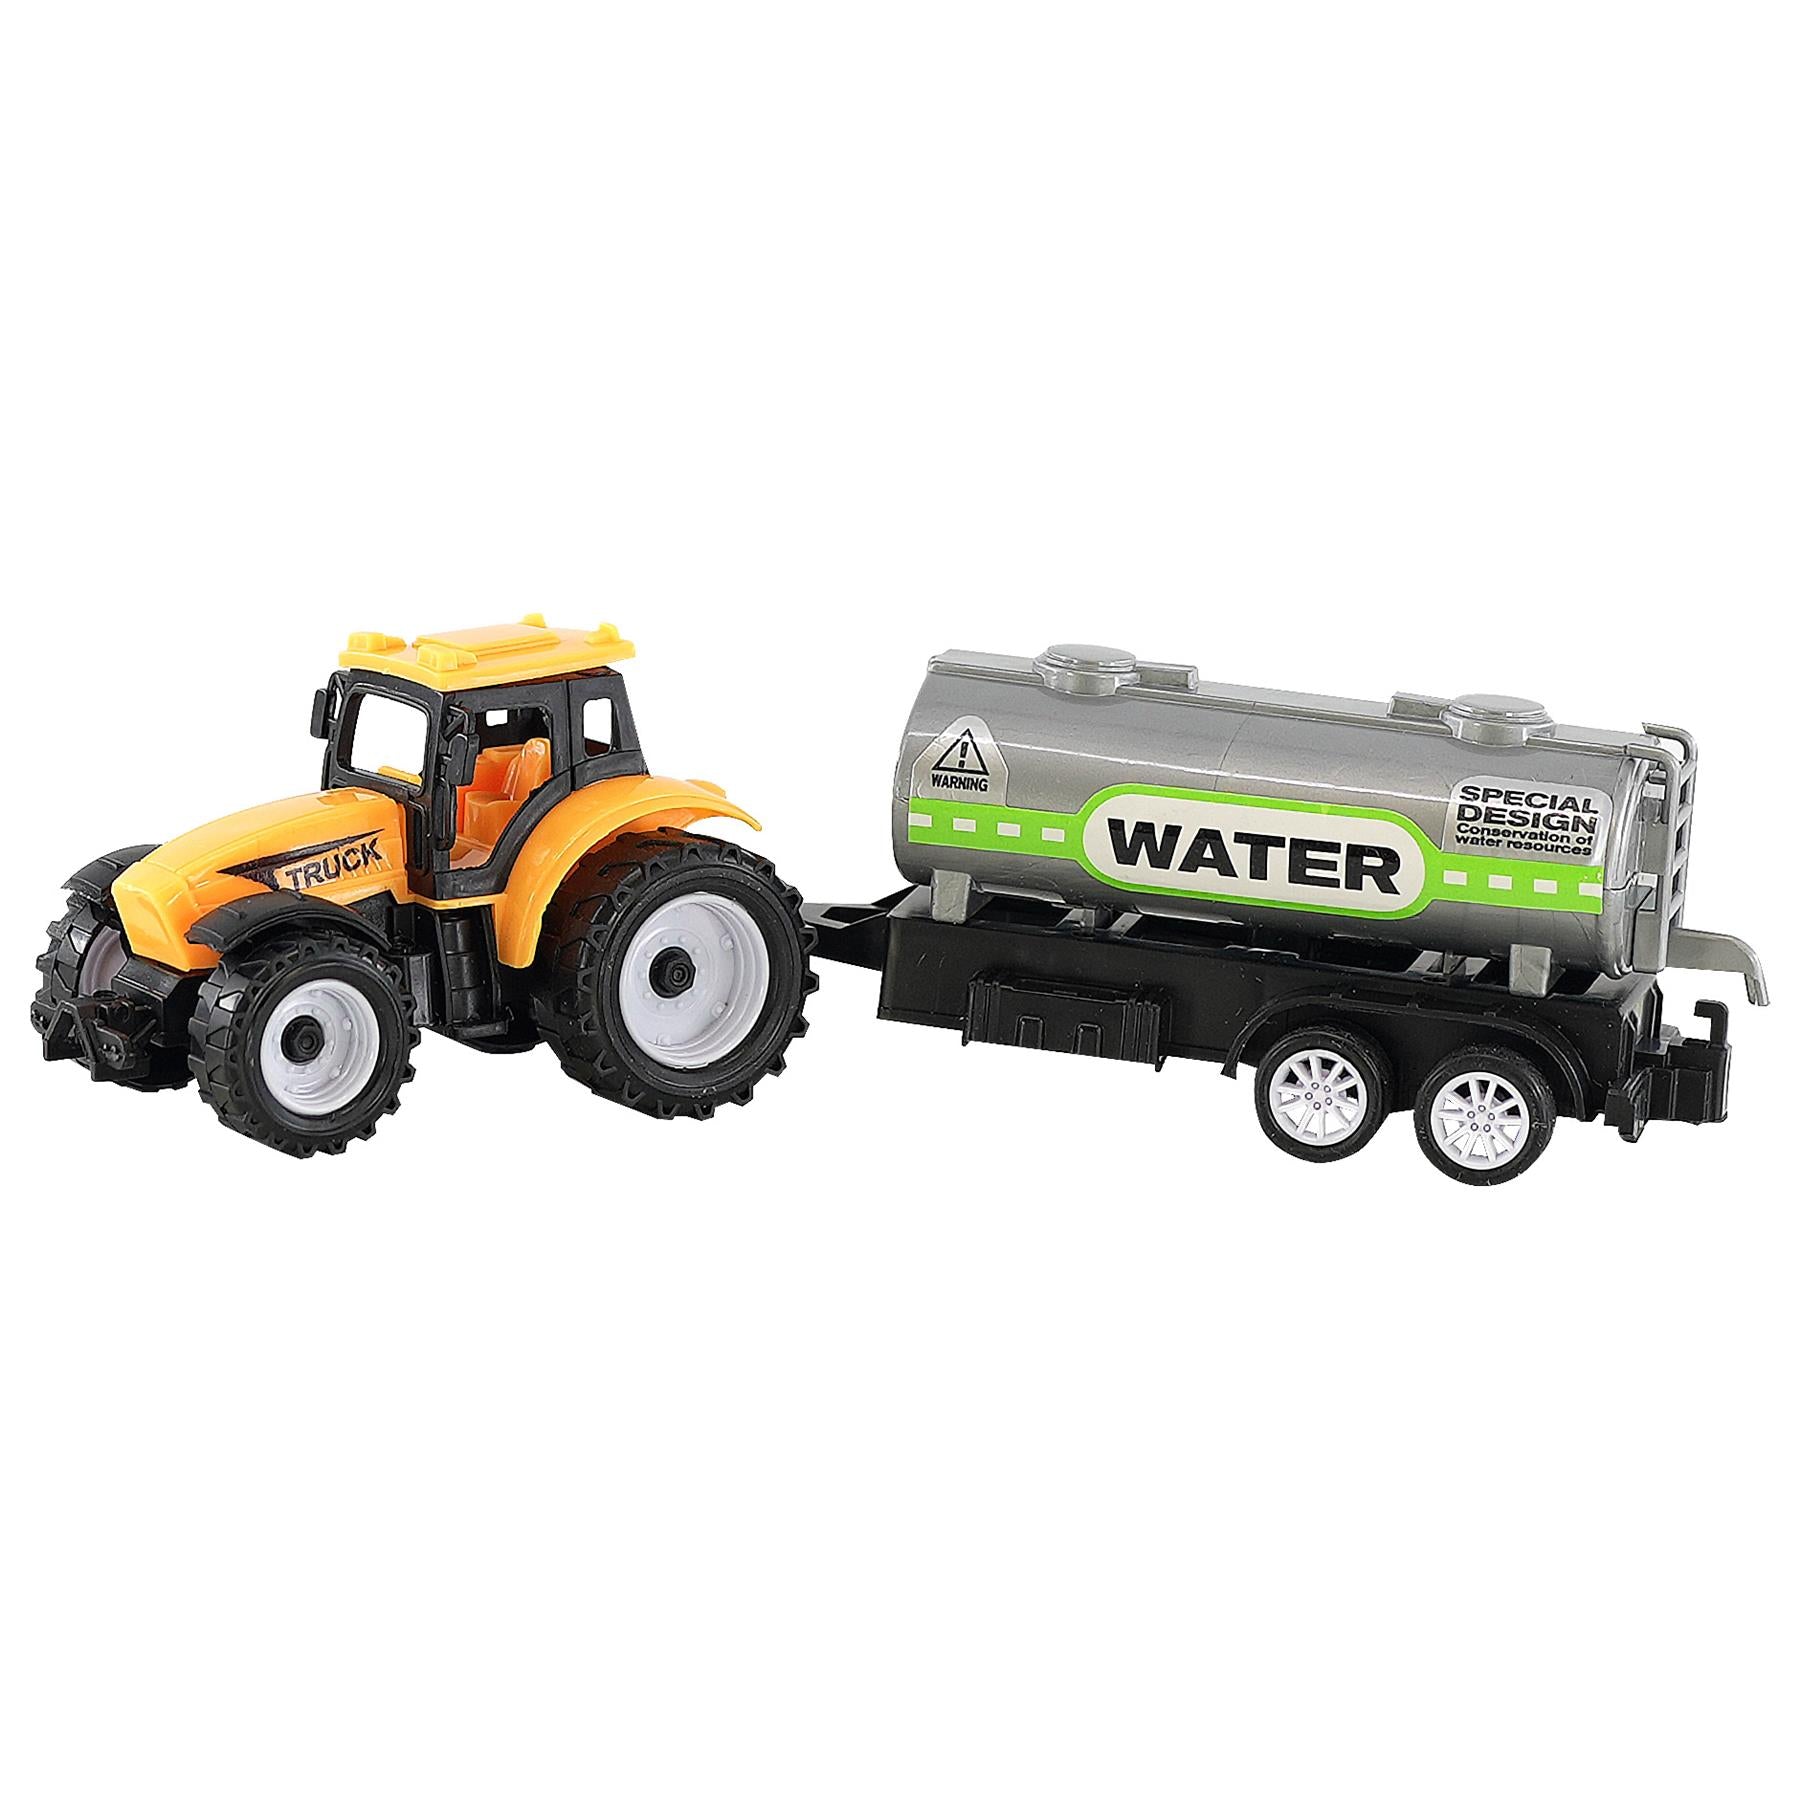 The Magic Toy Shop Farm Vehicle Farm Tractor and Trailer Playset